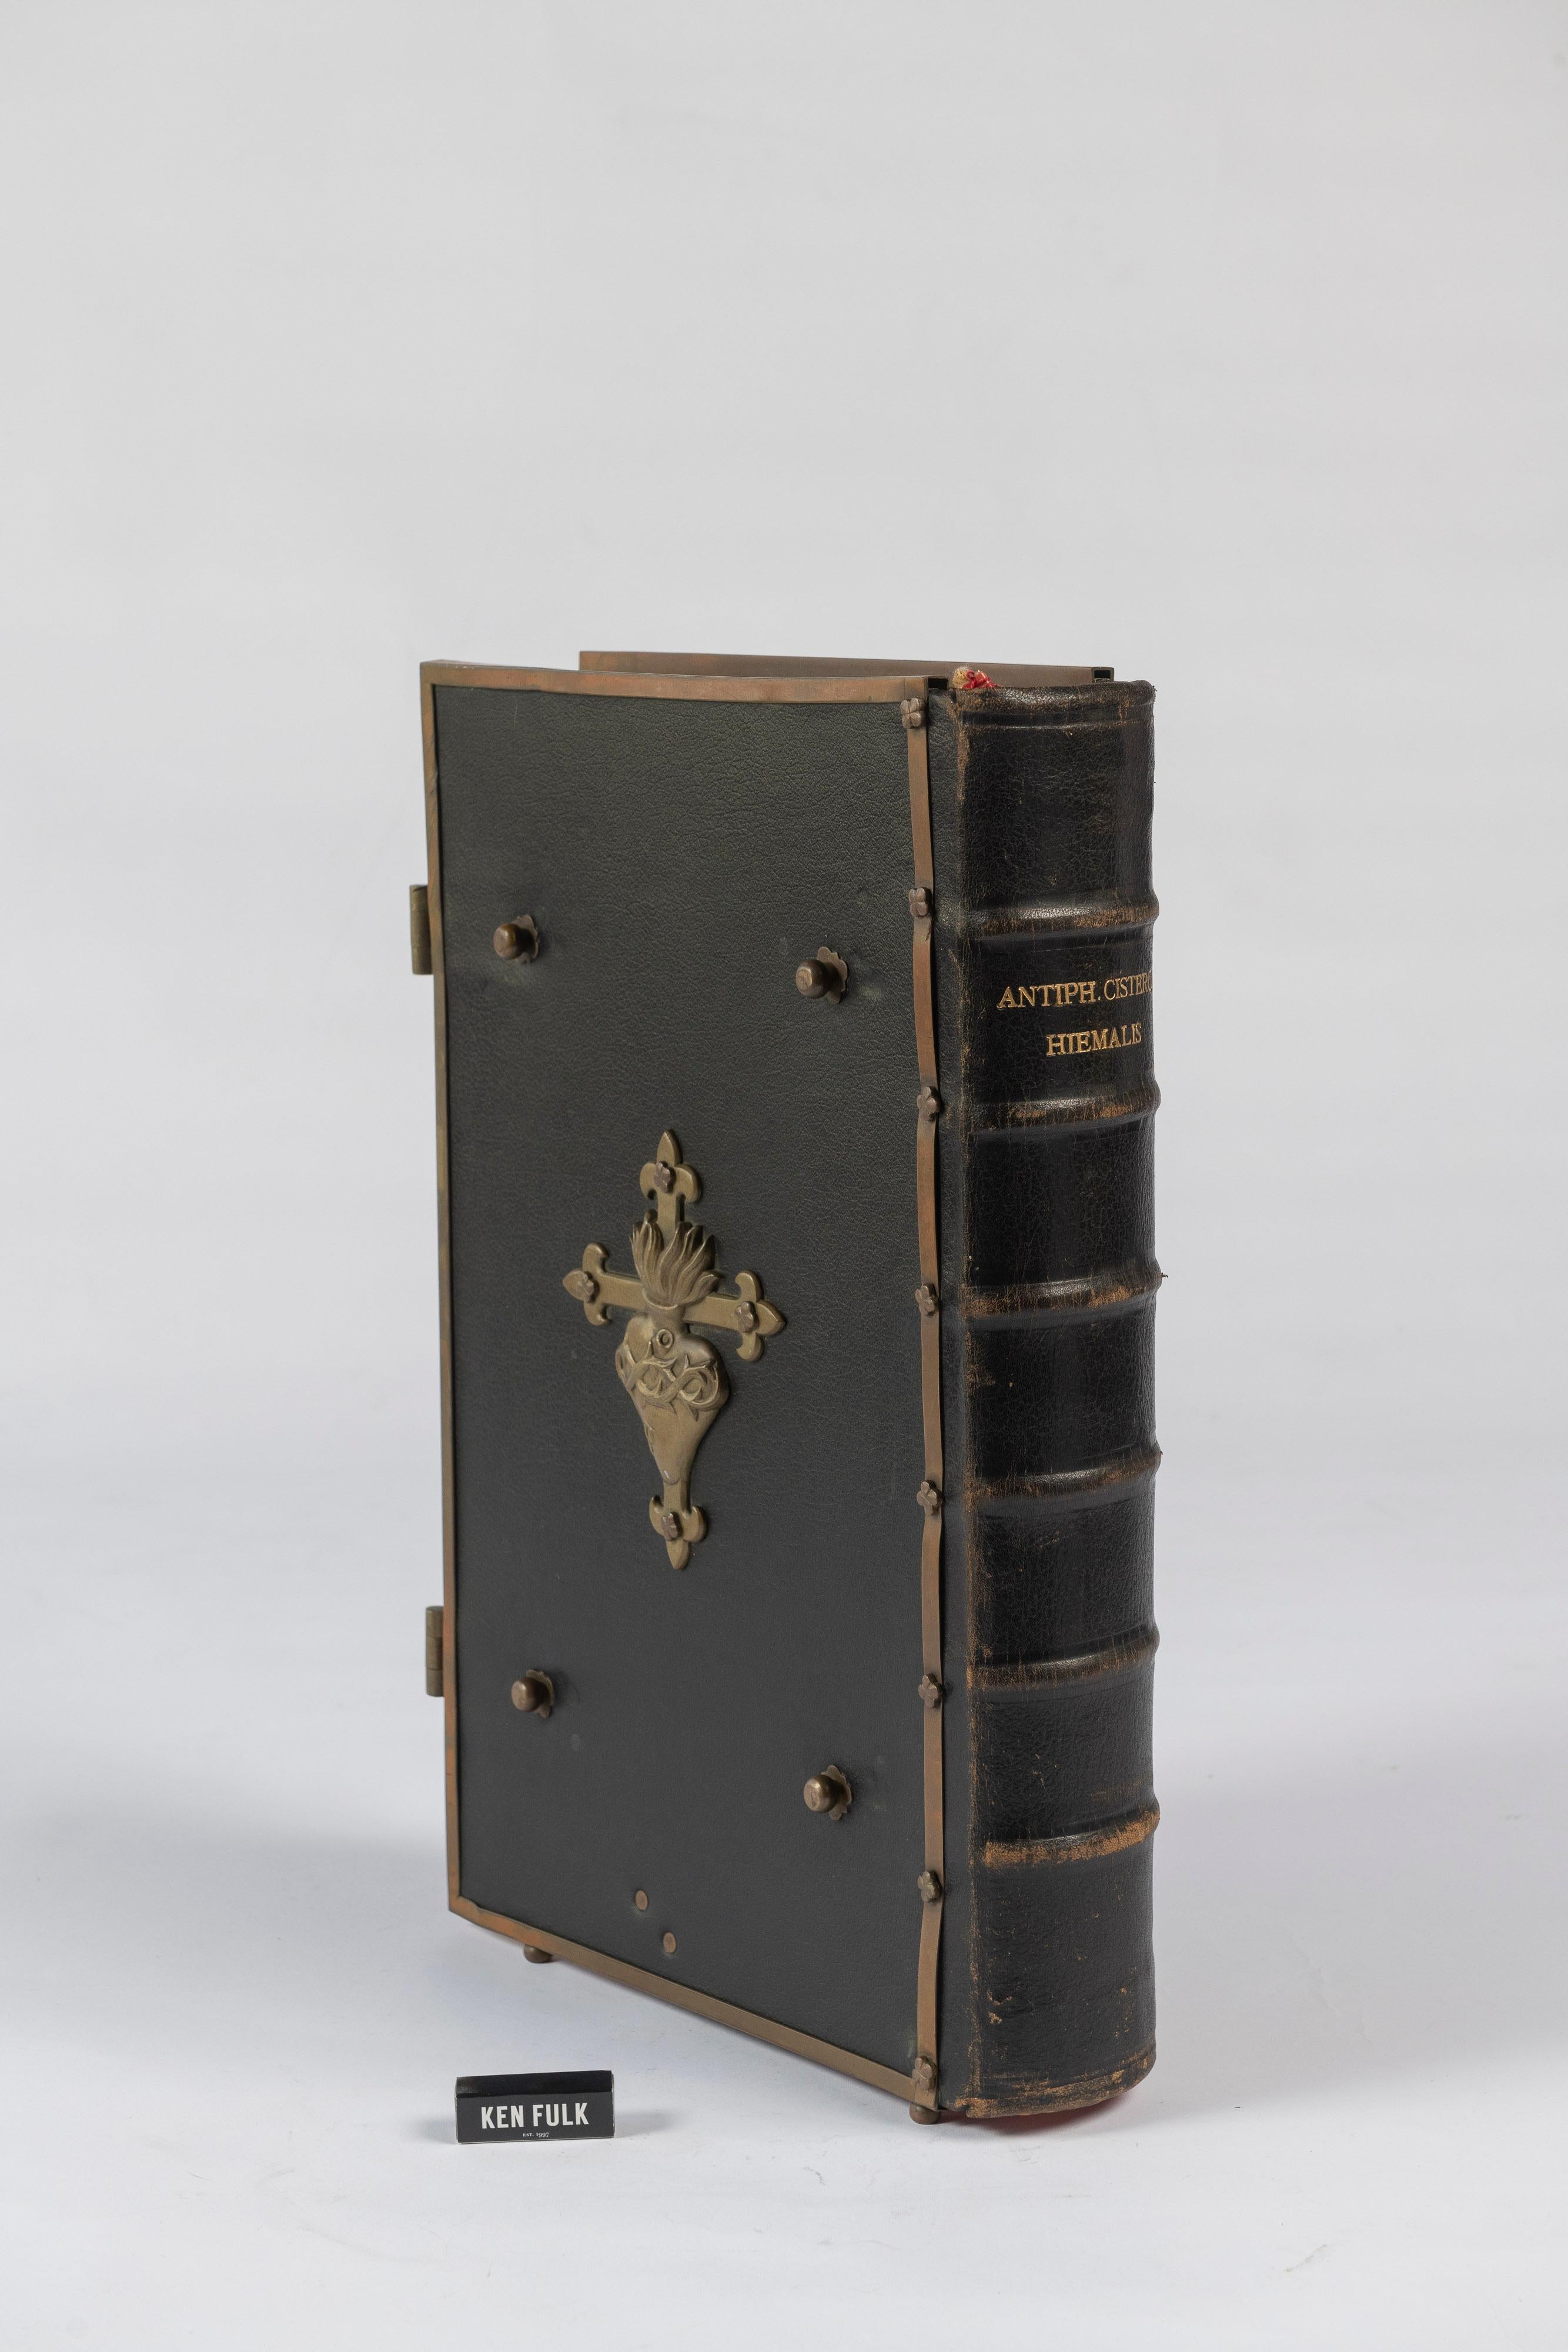 Published by Westmalle of Belgium in 1903, this elaborate hardcover choir book is black morocco over board with metal fore edge clamps, large metal holy cross centerpiece to the upper board, covers framed in metal. The book is printed in black and